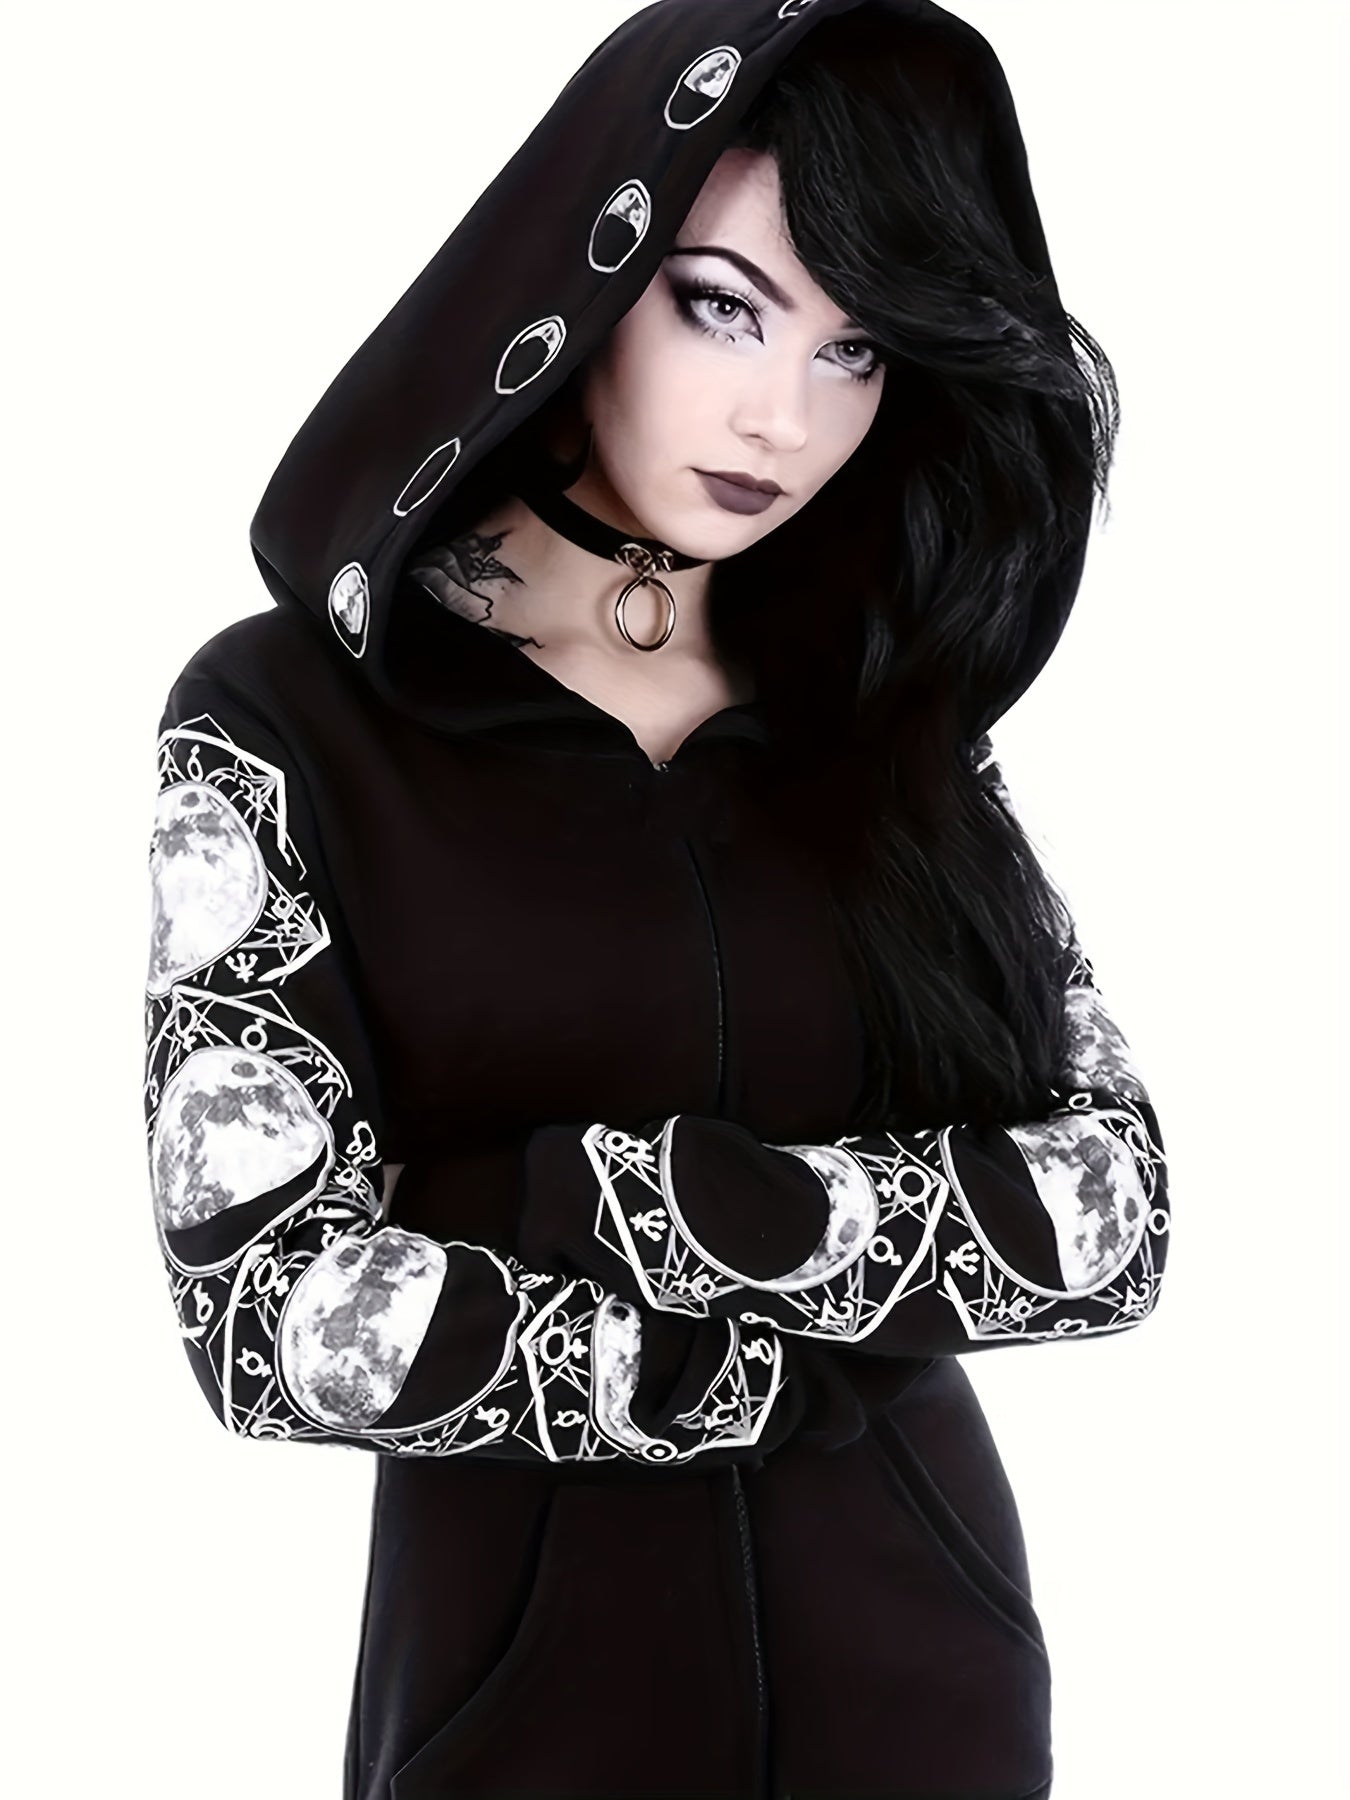 A woman with long black hair and bold makeup wears a casual black hoodie made of polyester, adorned with moon phase designs on the sleeves and hood, and a choker necklace with a ring. Her arms are crossed, wearing the Plus Size Gothic Sweatshirt, Women's Plus Moon Print Long Sleeve Zipper Slight Stretch Hoodie With Pockets by Maramalive™.